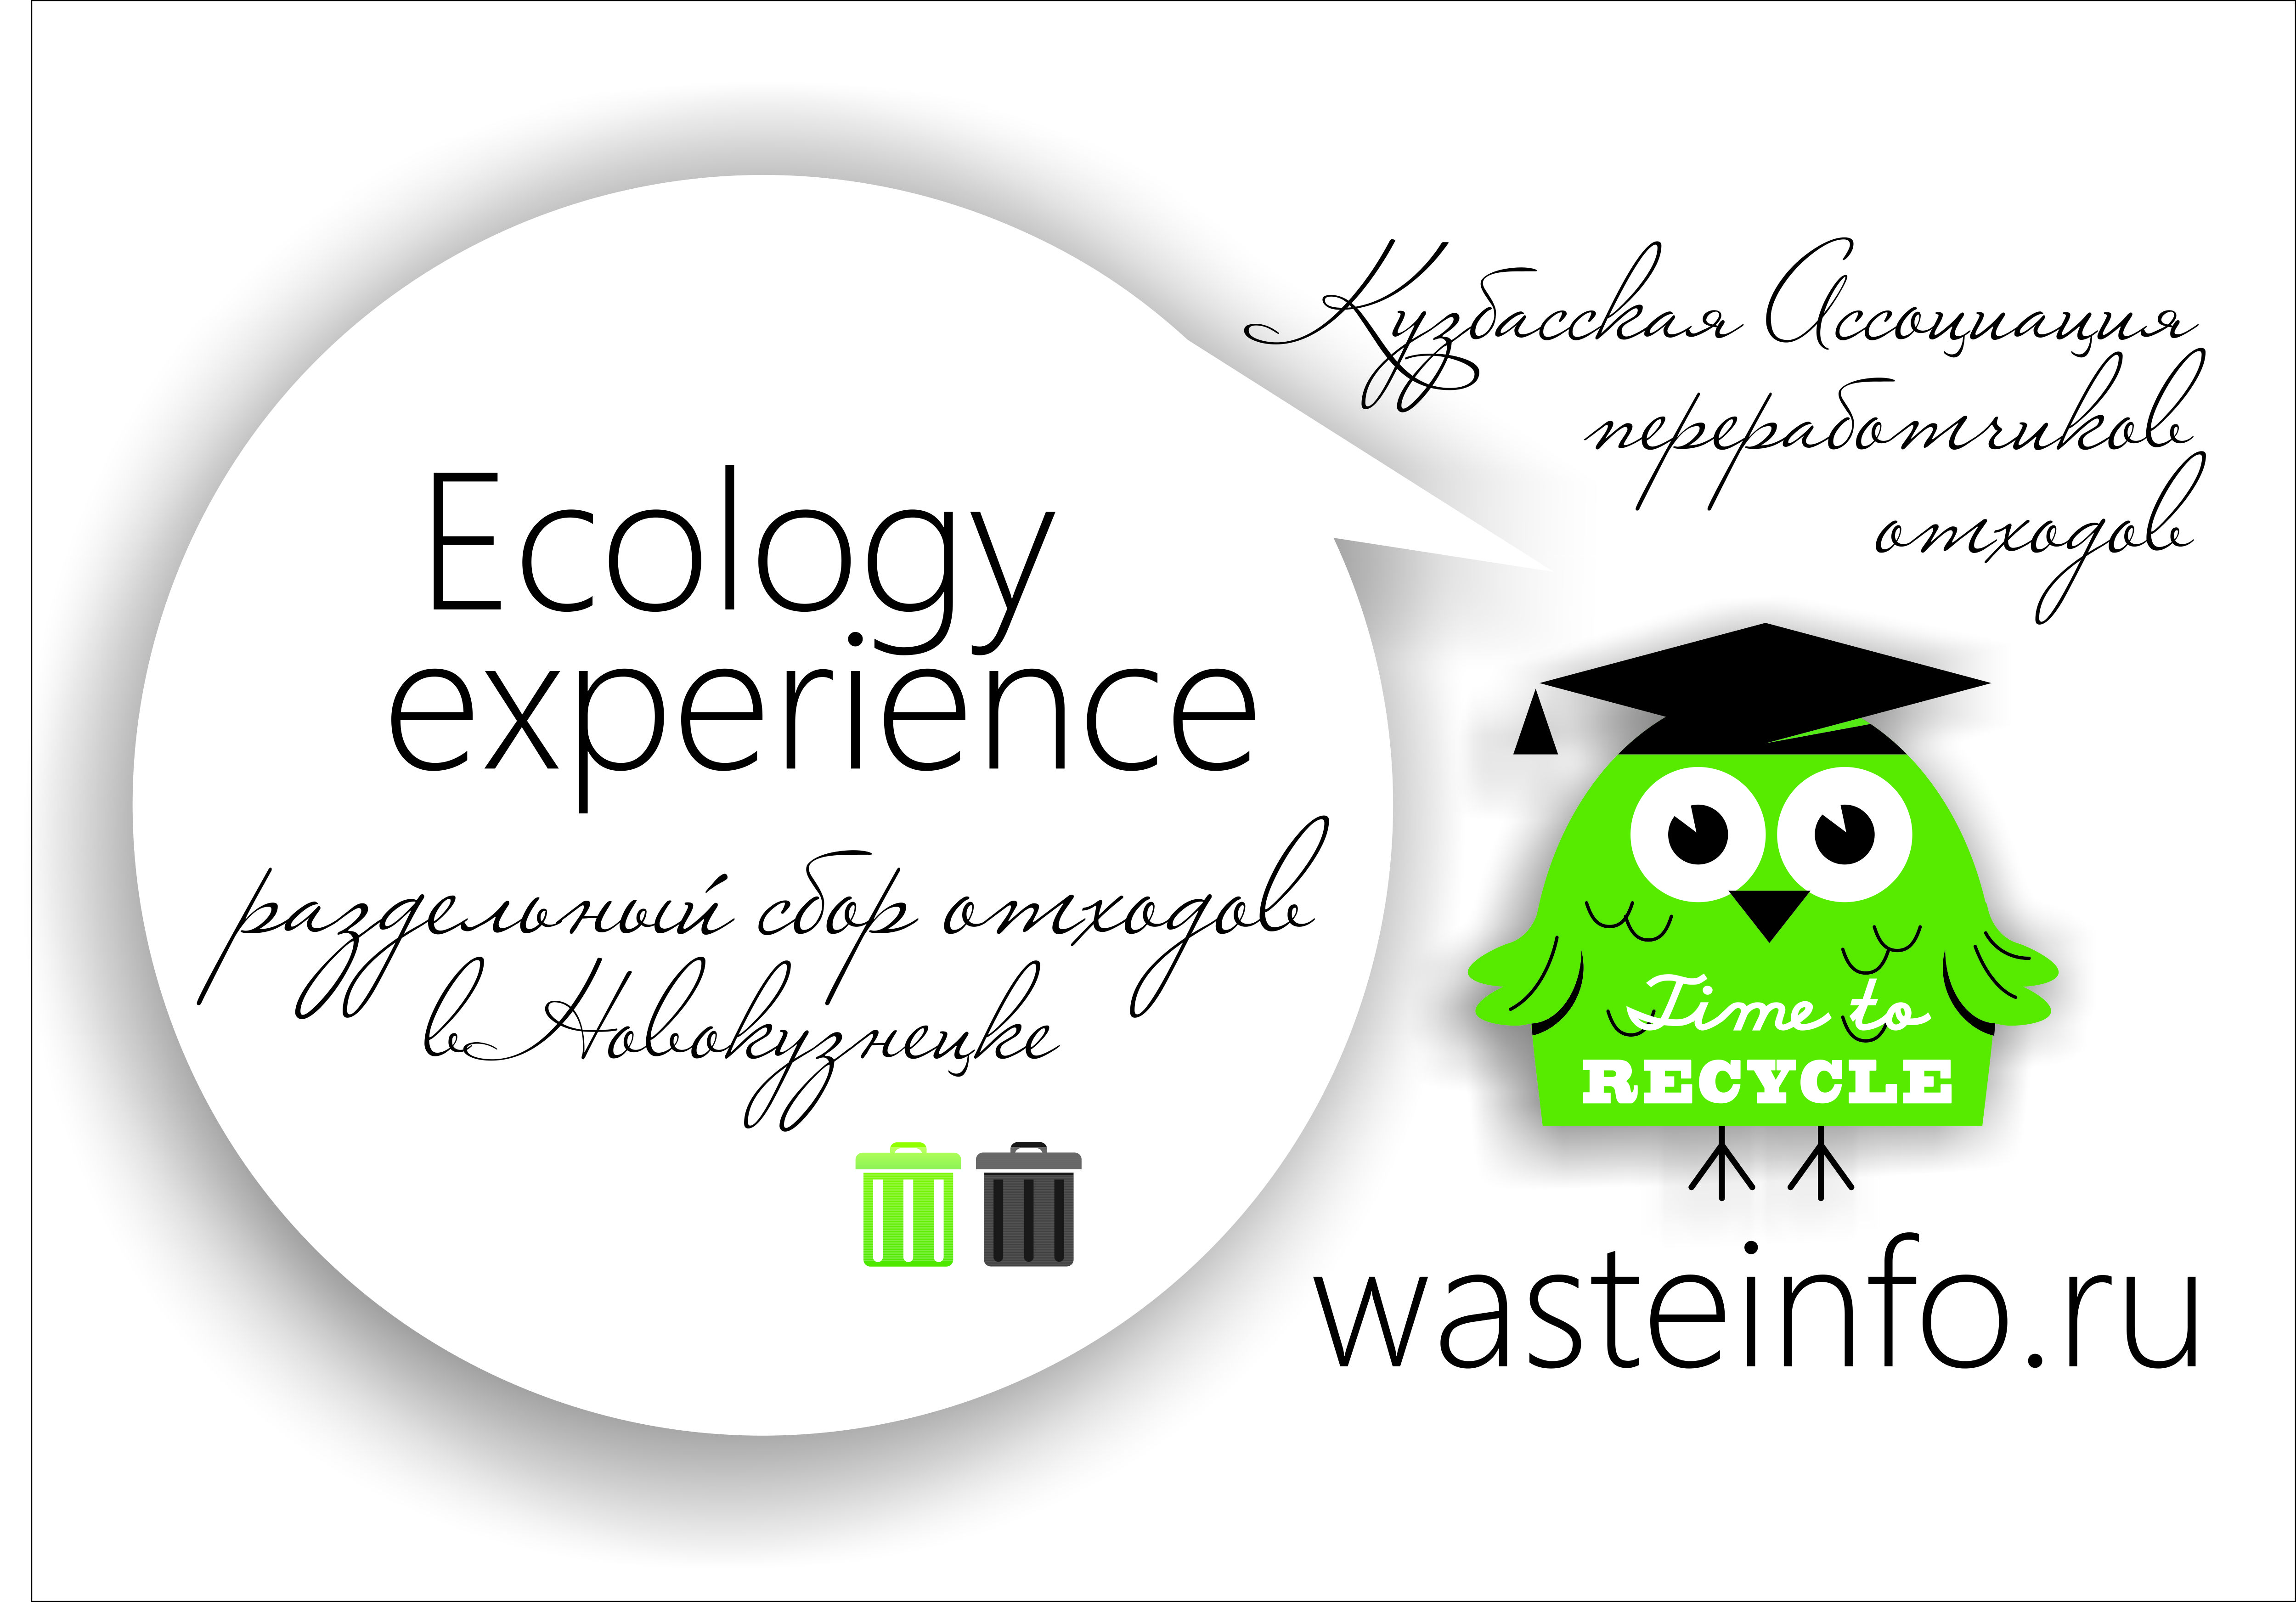 Ecology experience